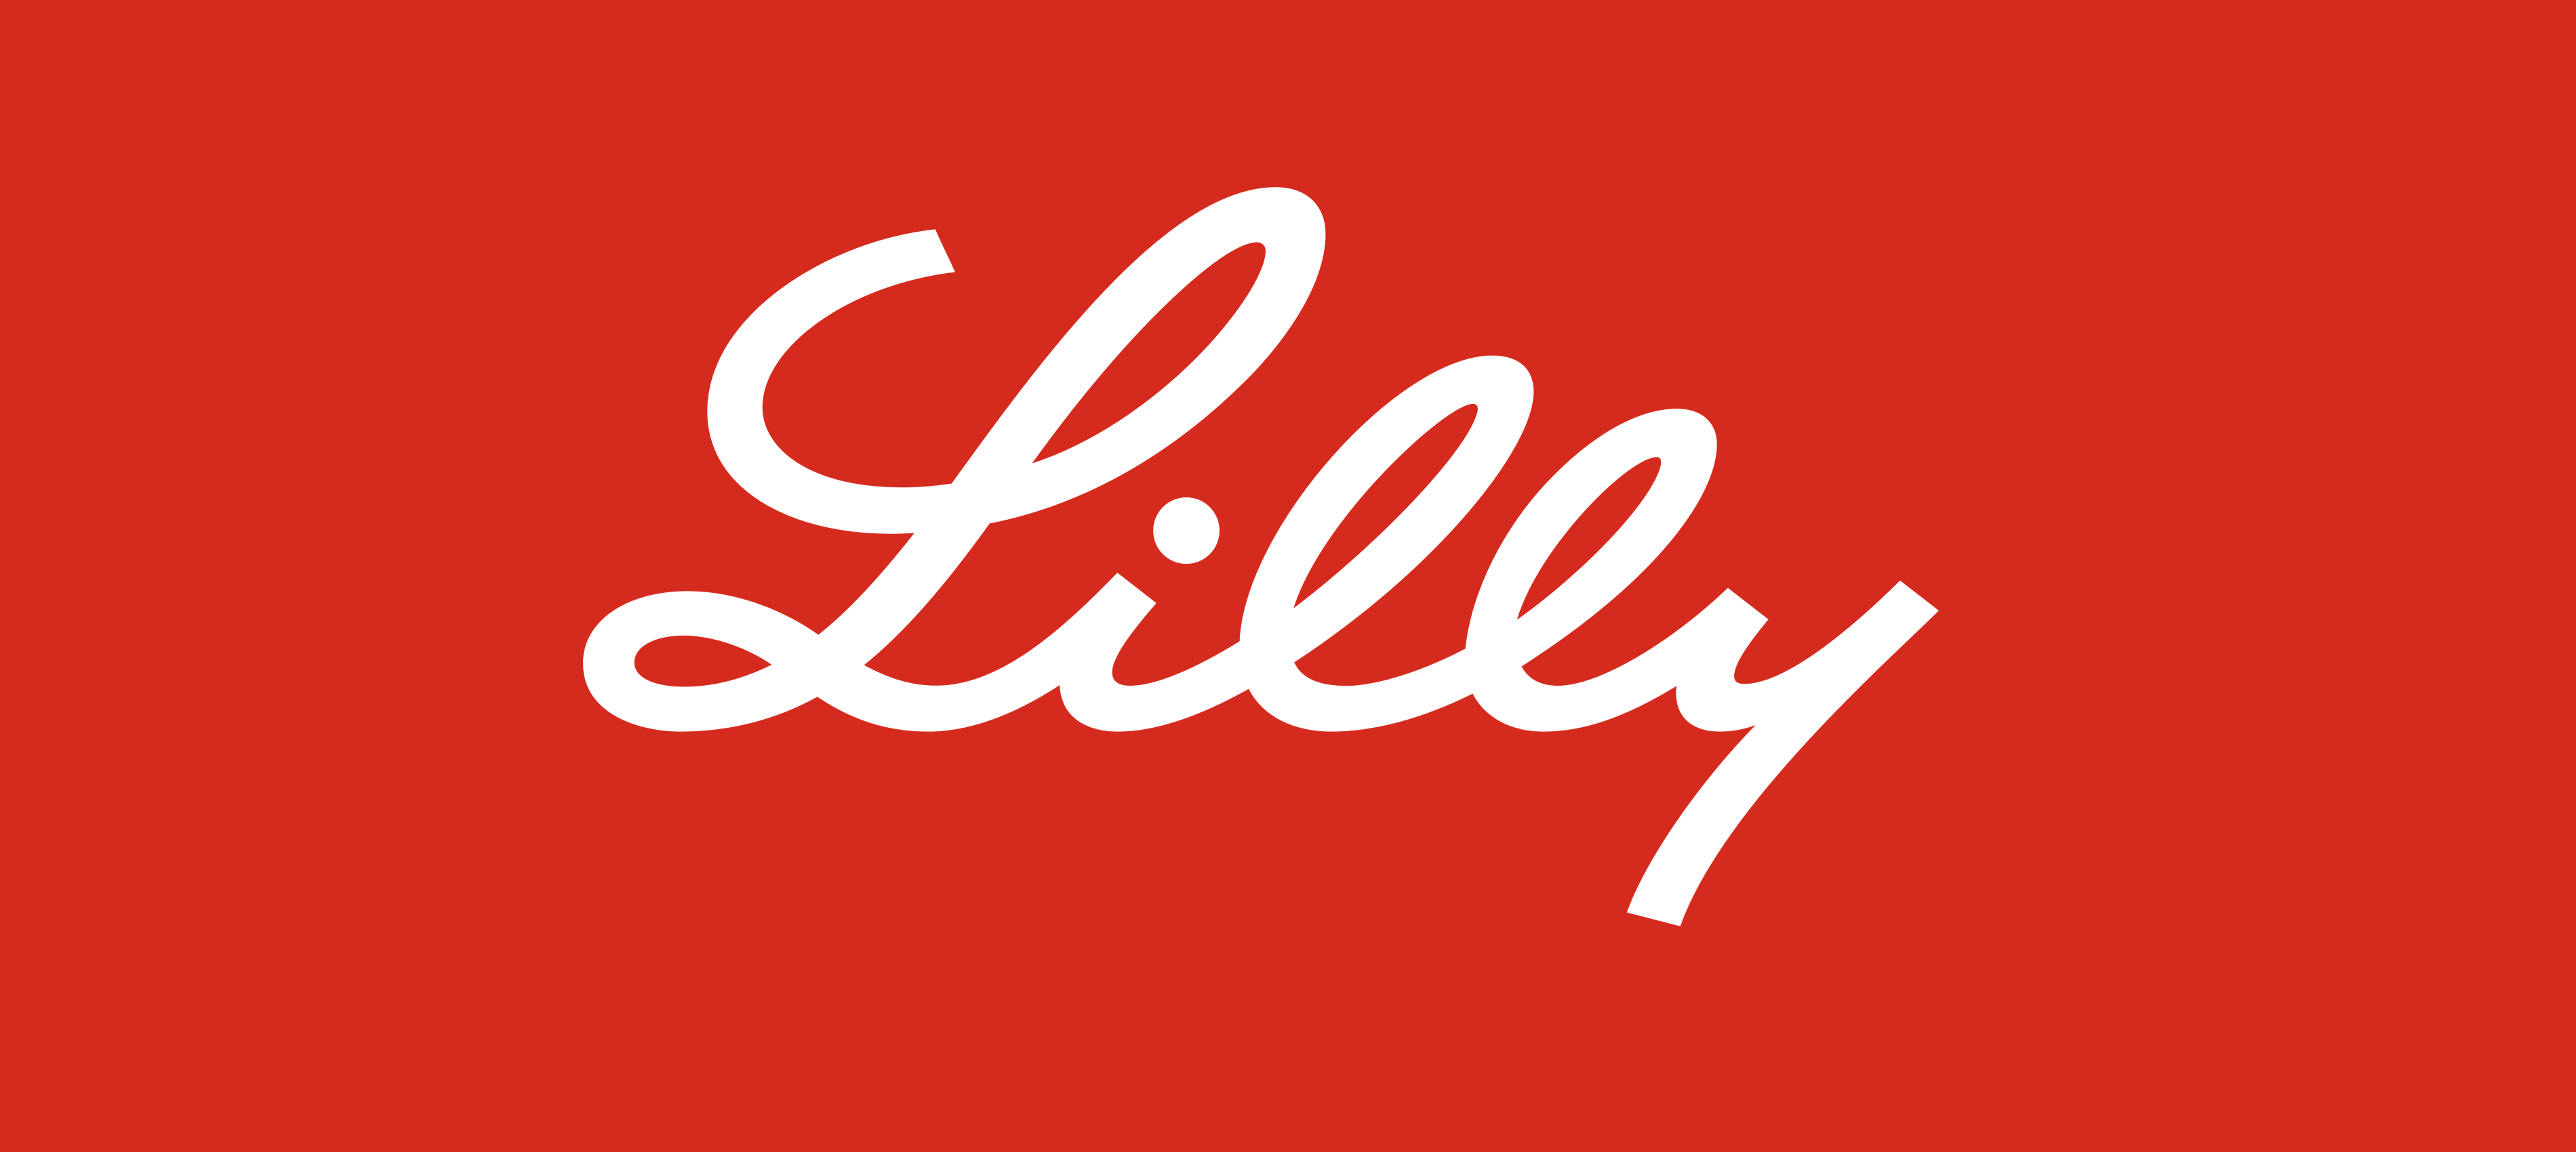 Lilly Logo - Lilly – Logos Download